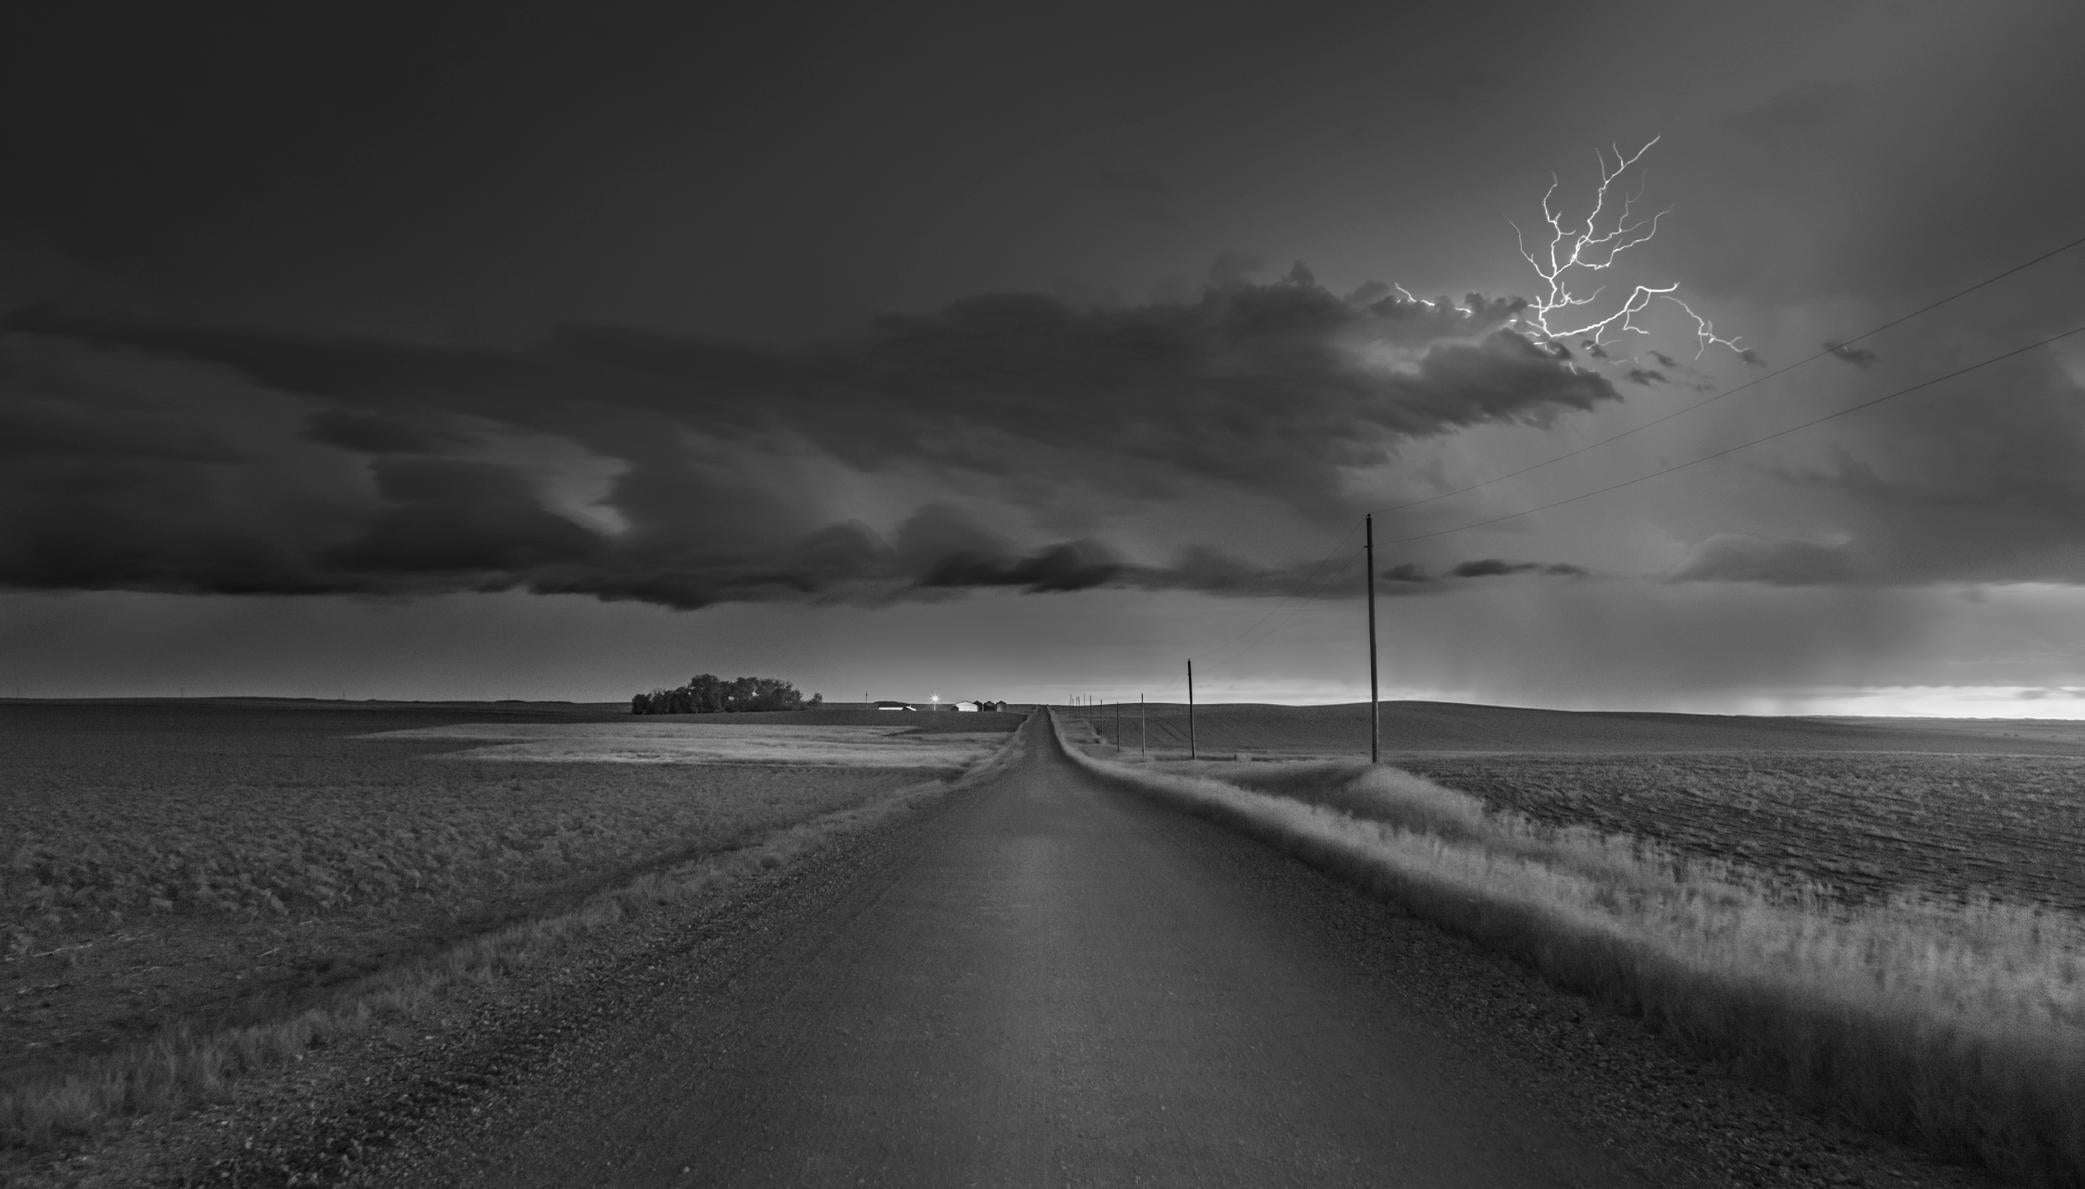 Mitch Dobrowner Black and White Photograph - Farm House and Shelf Cloud, limited edition photograph, signed, archival ink